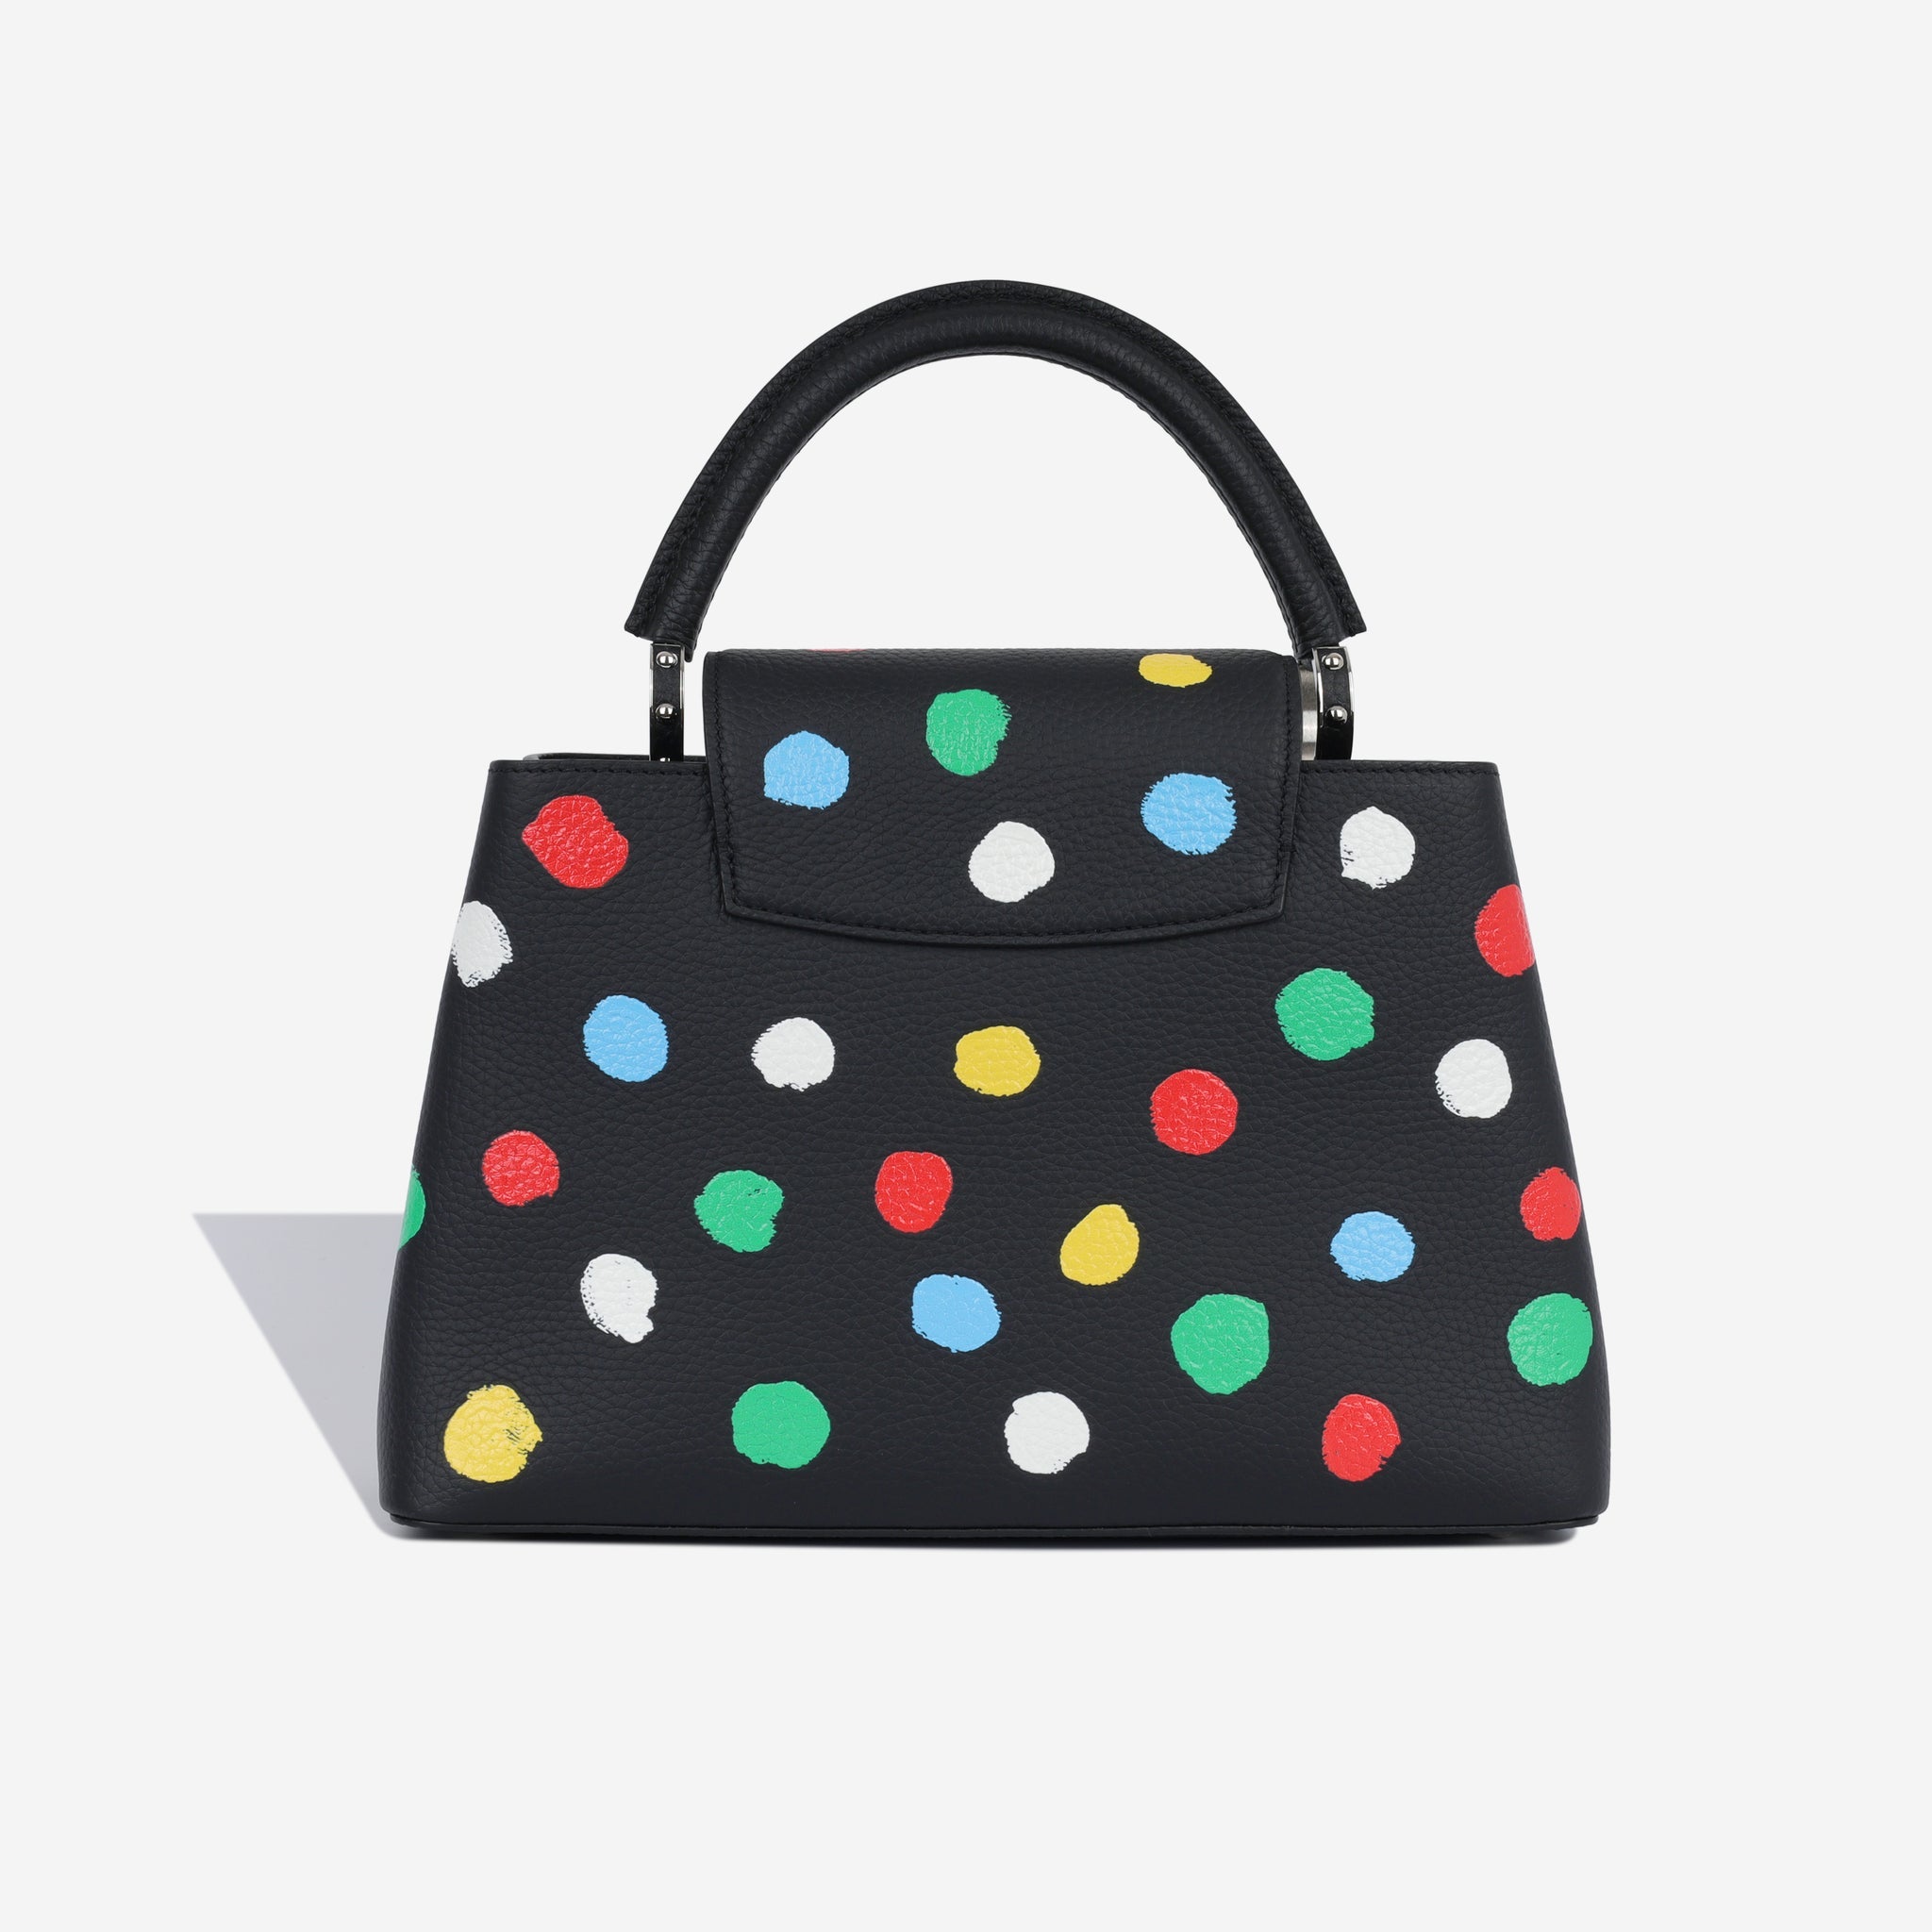 Louis Vuitton Bag Capucines BB Red/White by Yayoi Kusama – YangGallery